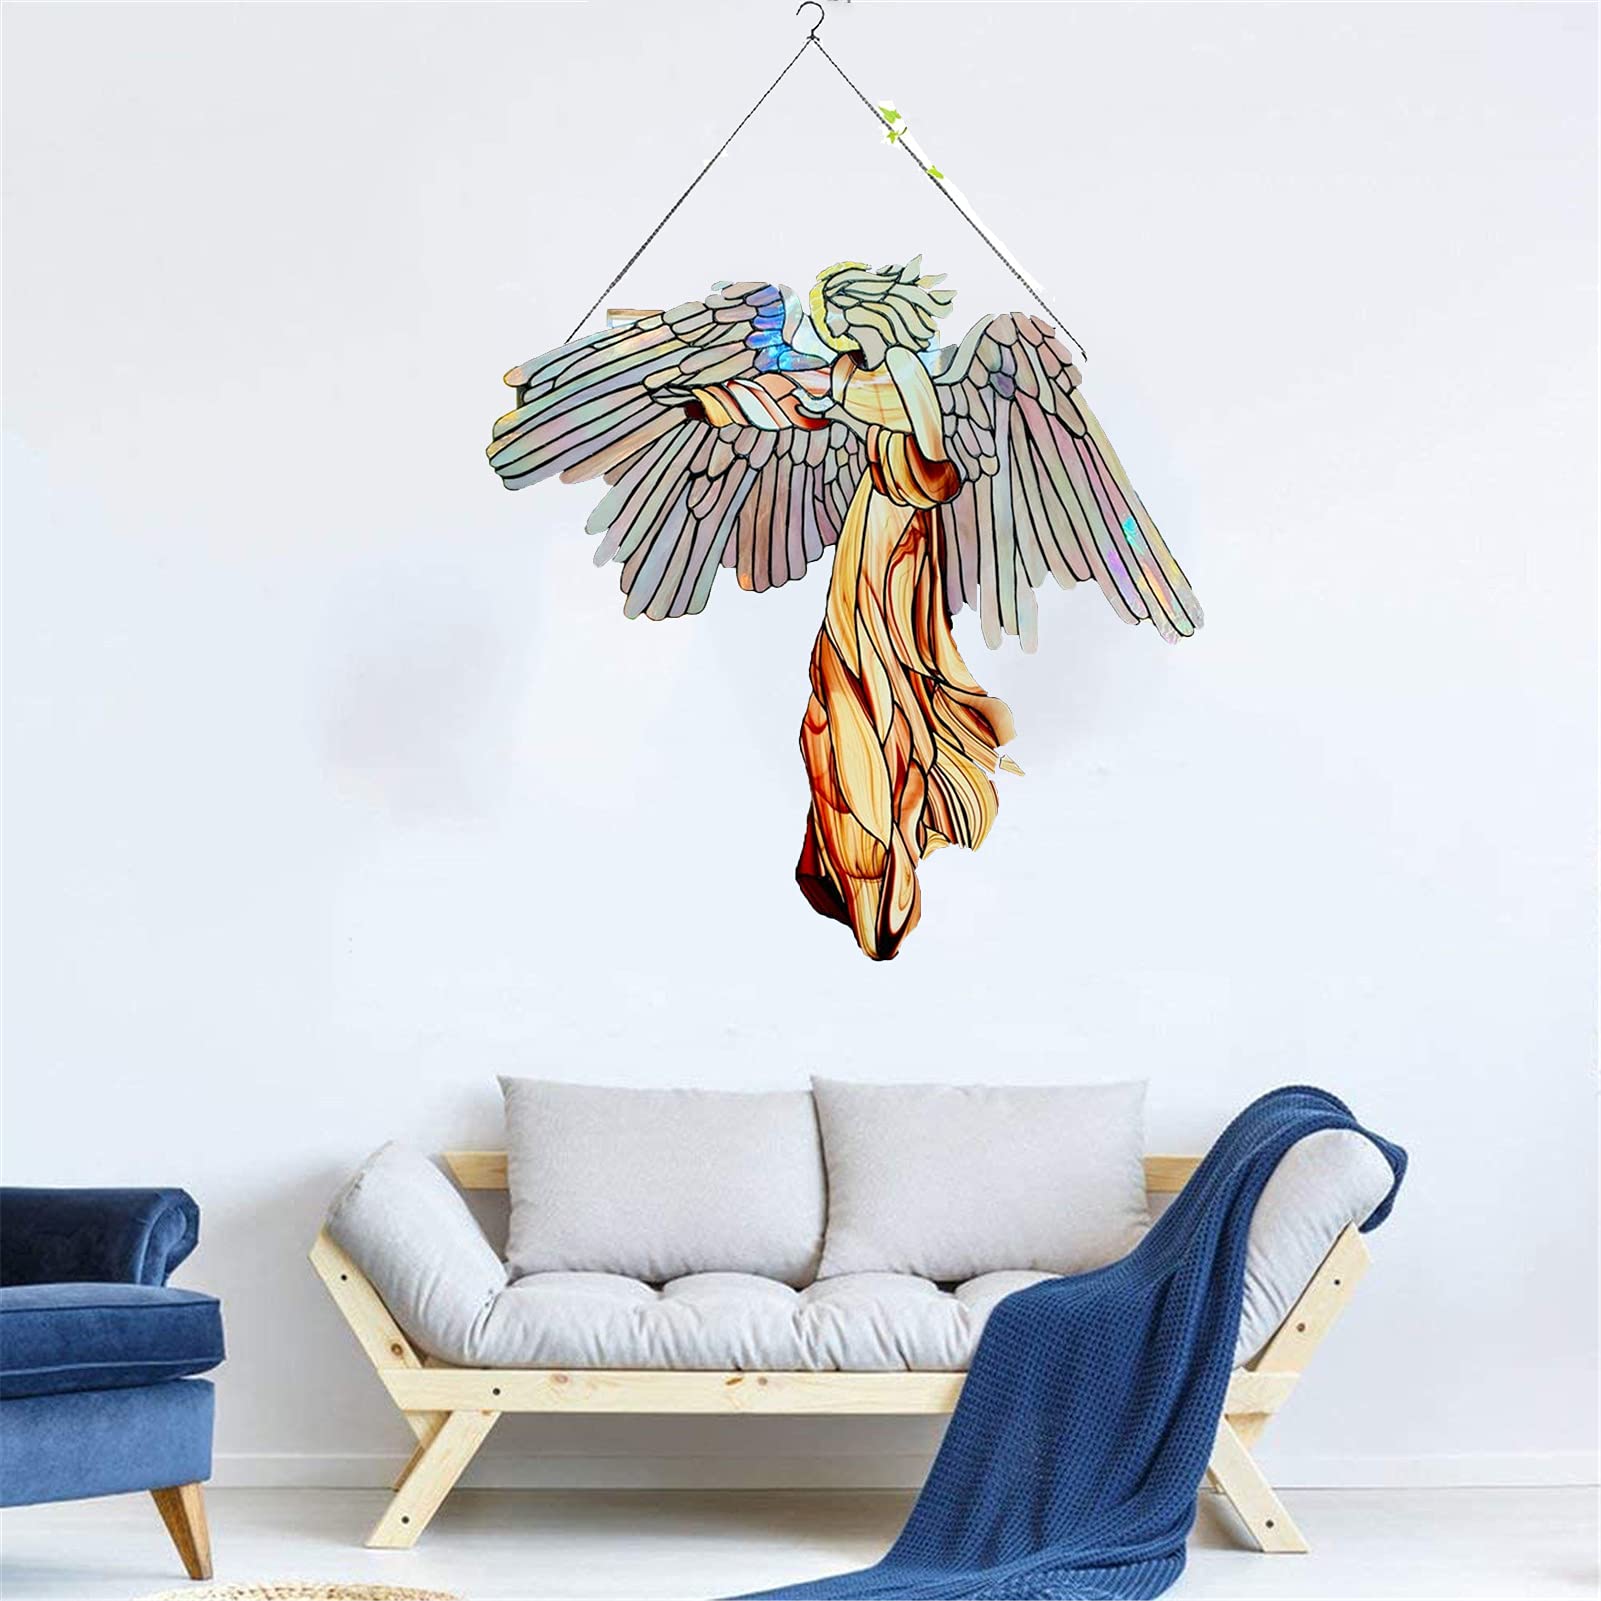 Acrylic Angel Wings Art Pendant For Home Decoratioon